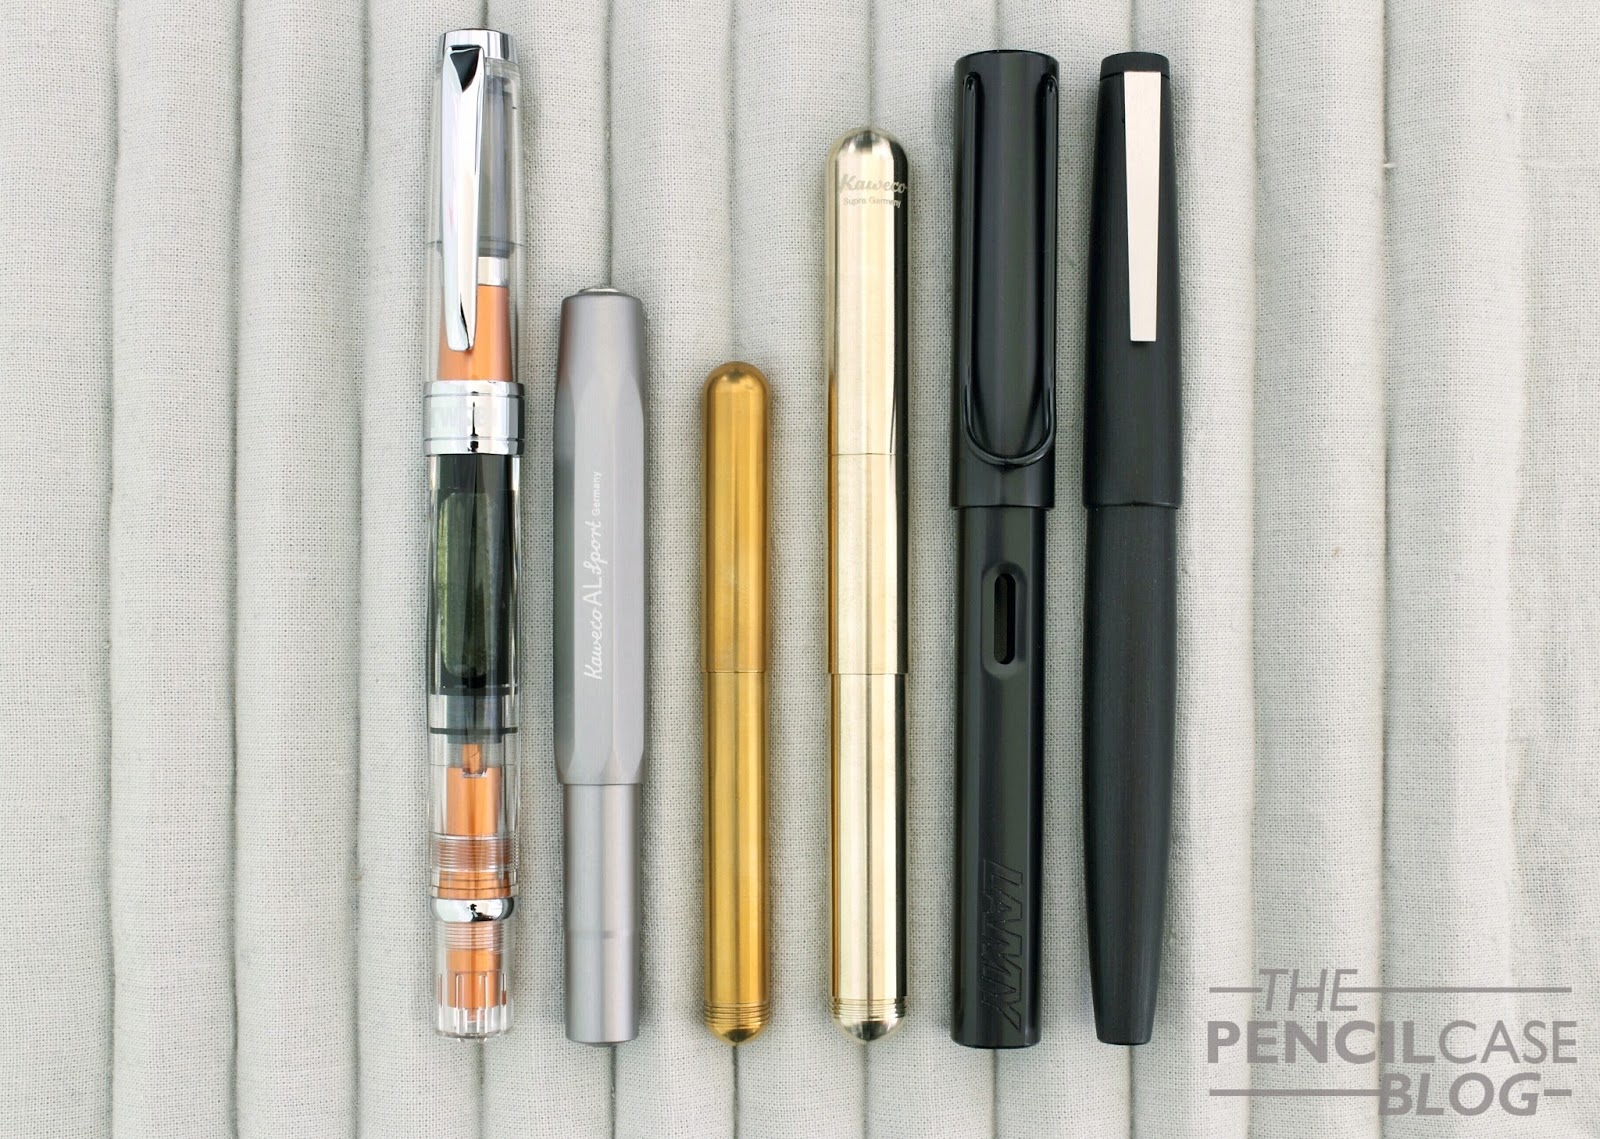 The Pencilcase Blog | Fountain pen, Pencil, Ink and Paper reviews 